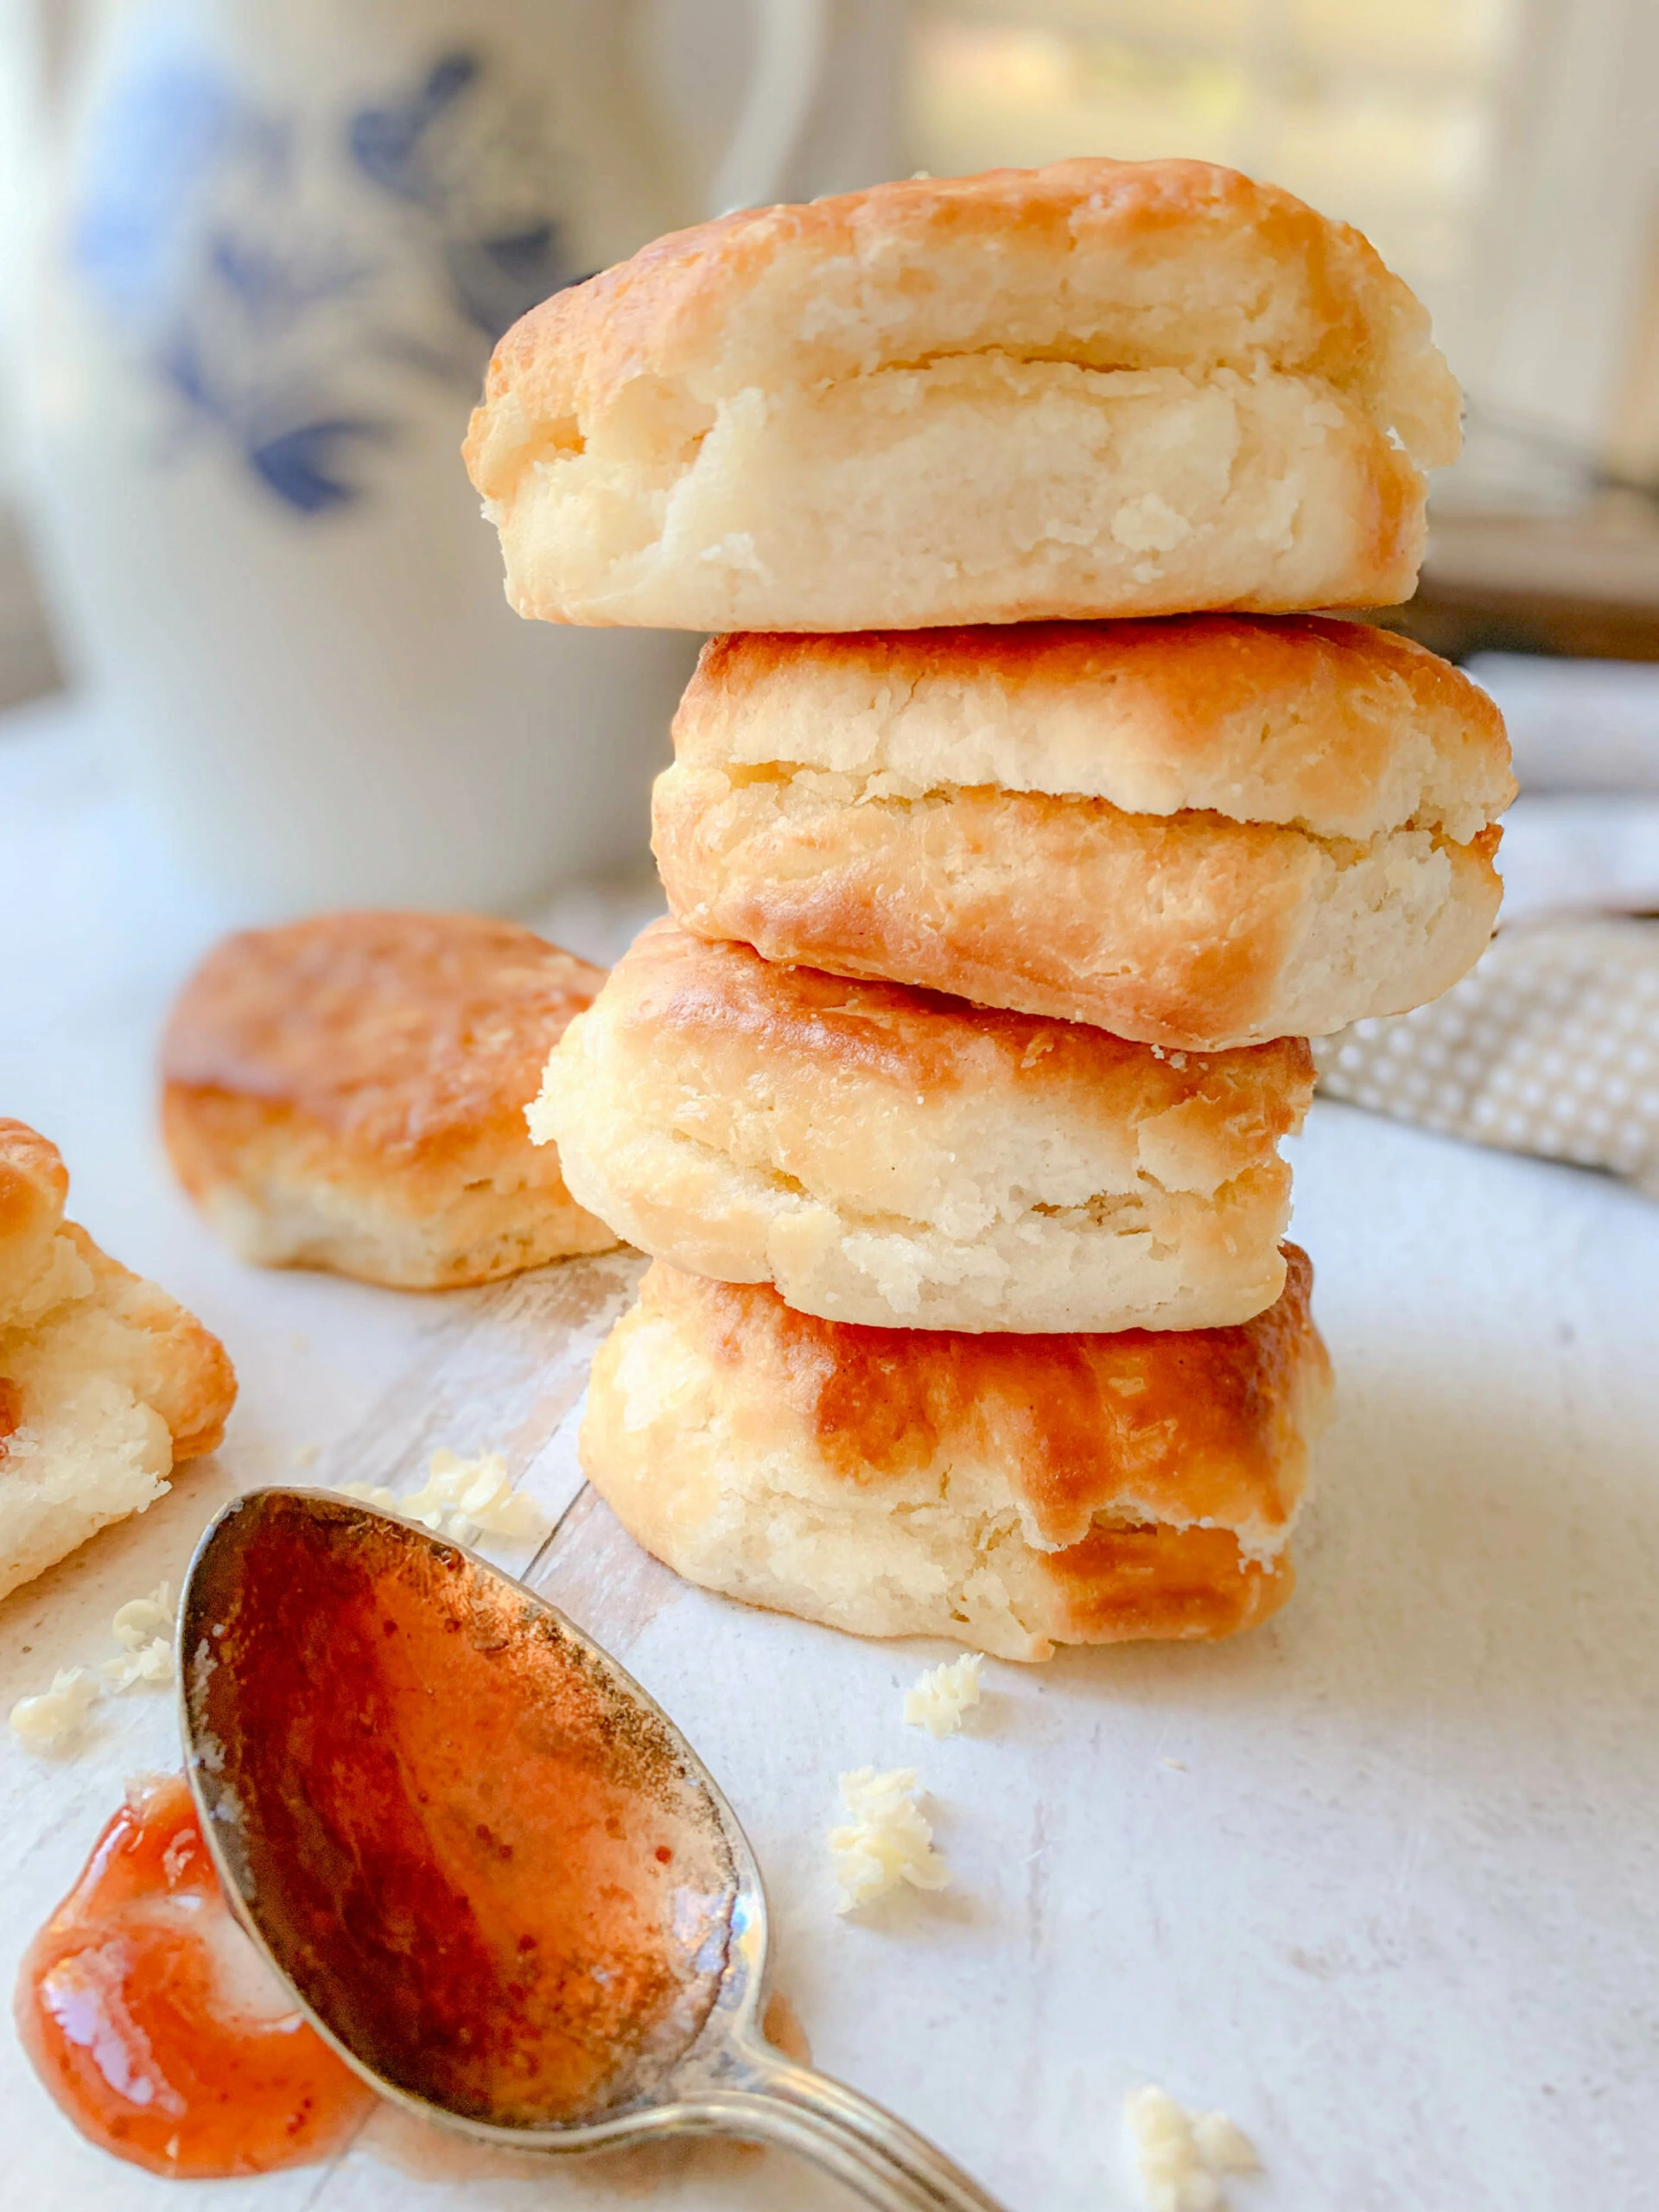 This photo shows 4 buttermilk biscuits stacked on top of each other. 